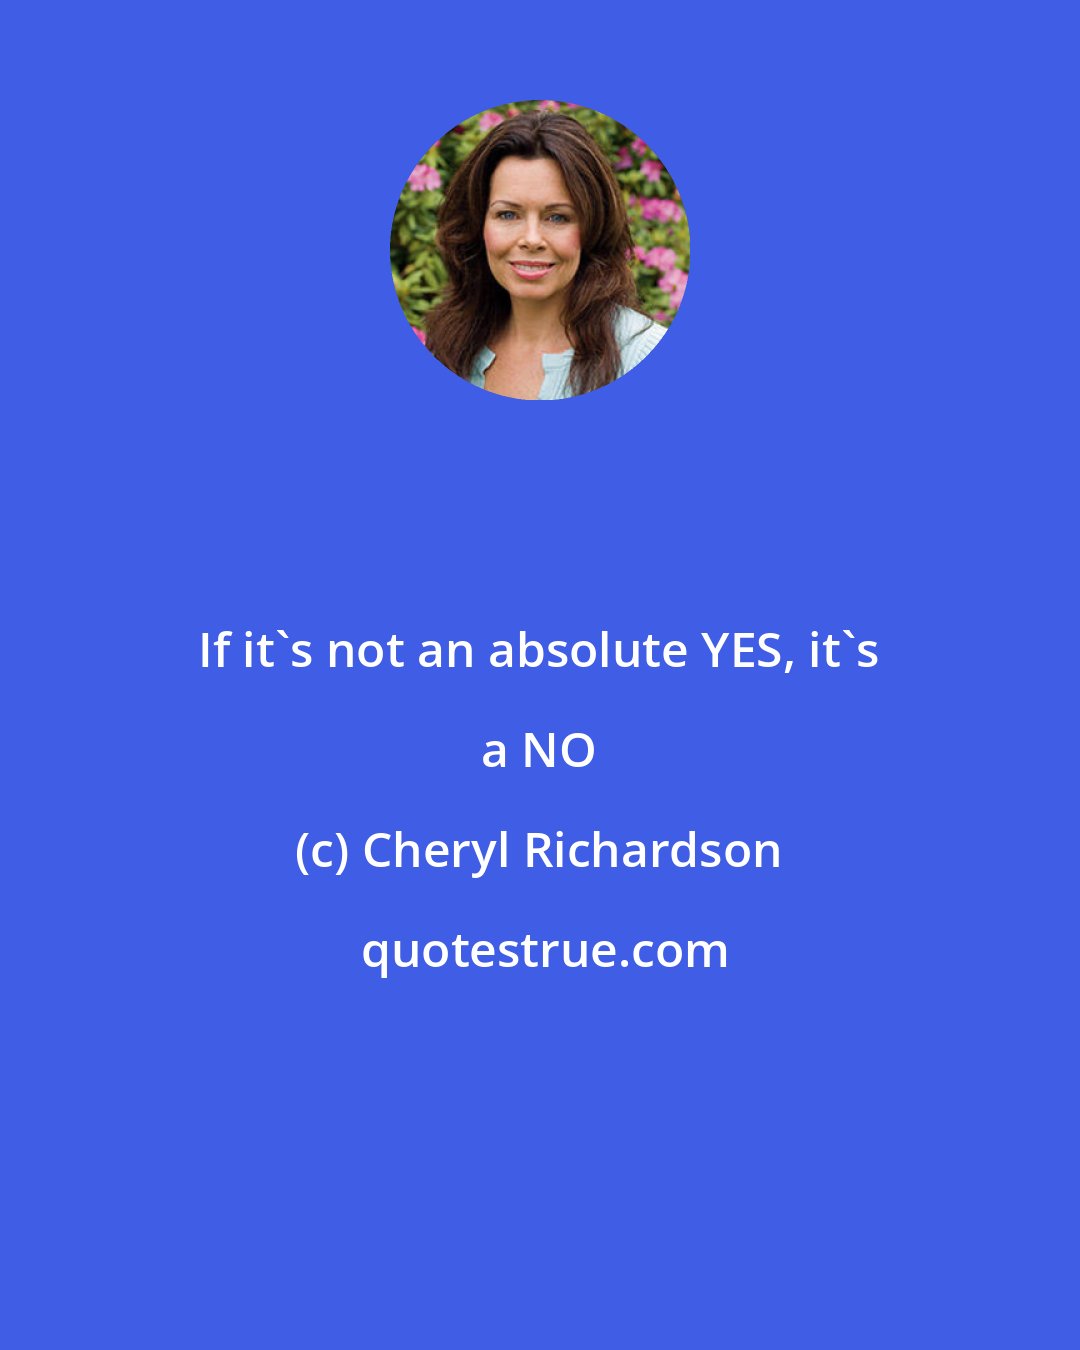 Cheryl Richardson: If it's not an absolute YES, it's a NO